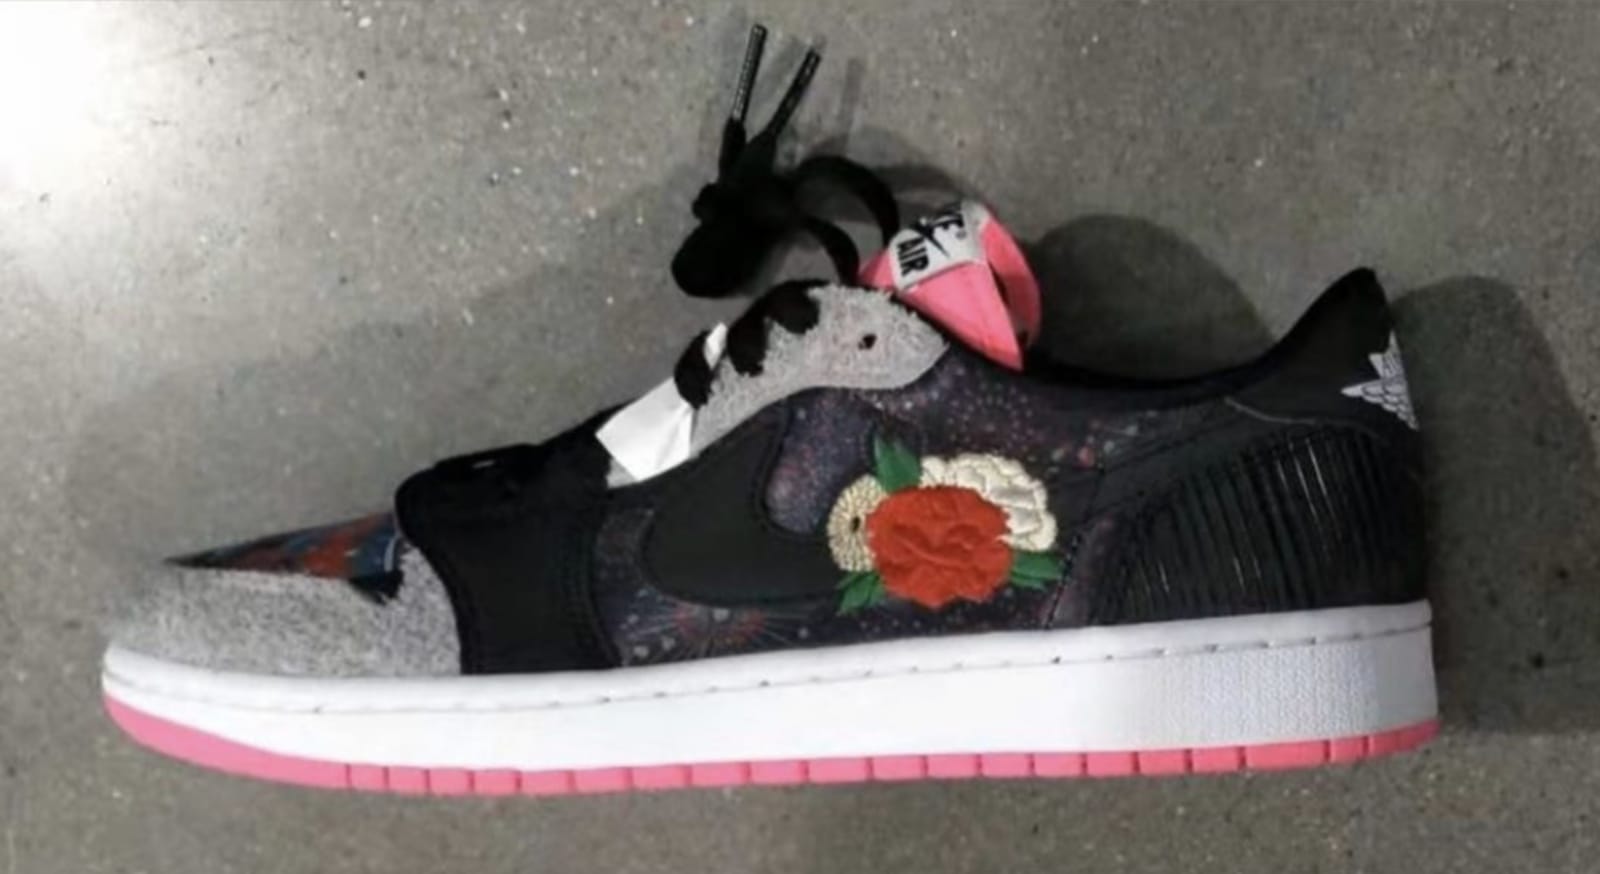 Air Jordan 1 Low Receives Chinese New Year Colorway: First Look